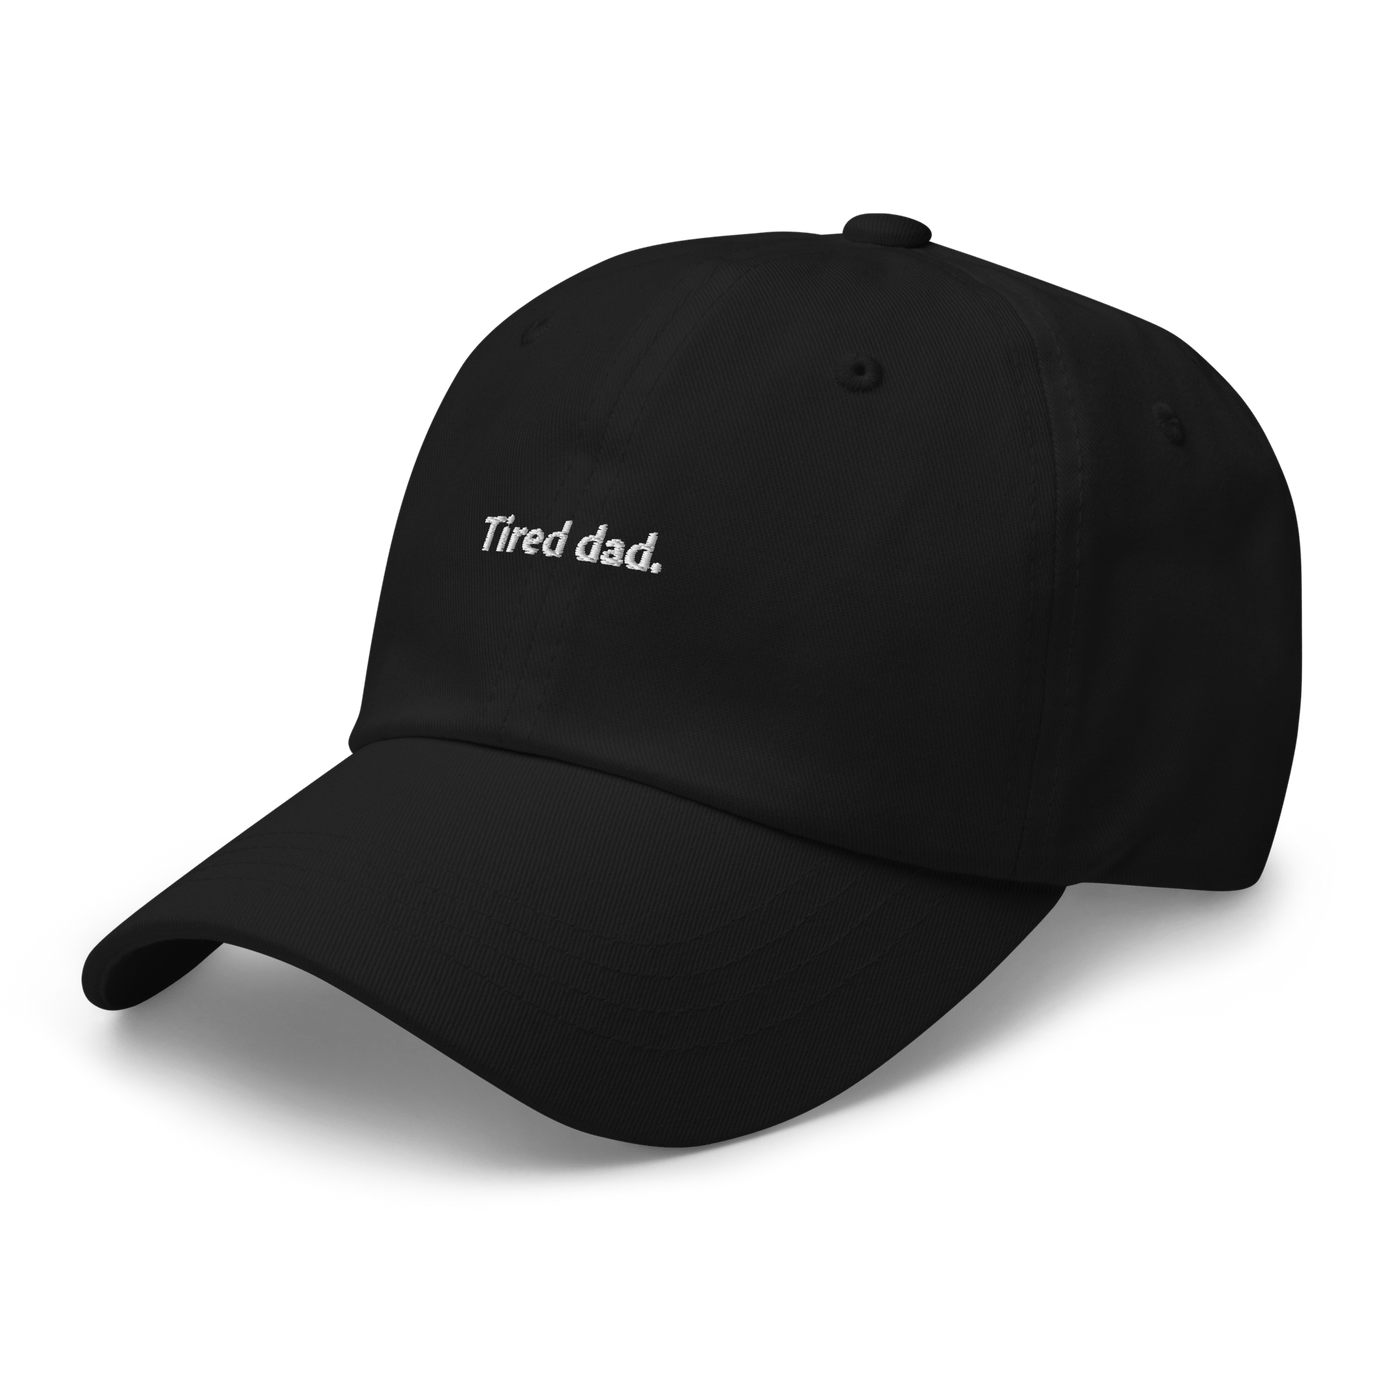 Tired Dad Hat - Black - - Just Another Cap Store